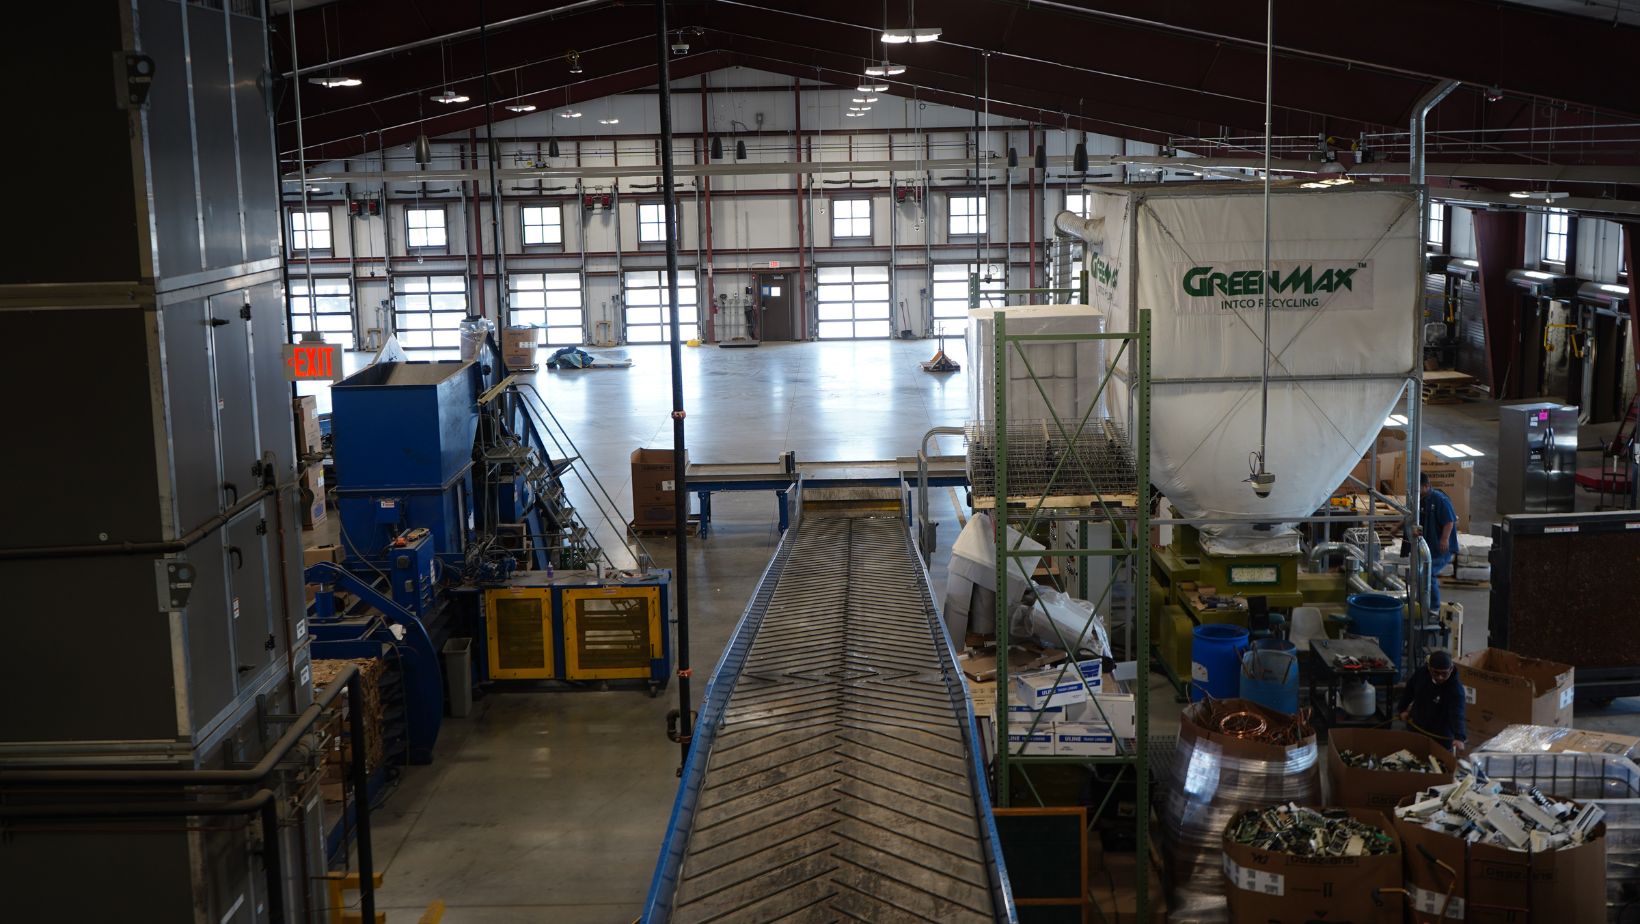 Interior of the Abt recycling center and conveyor belt